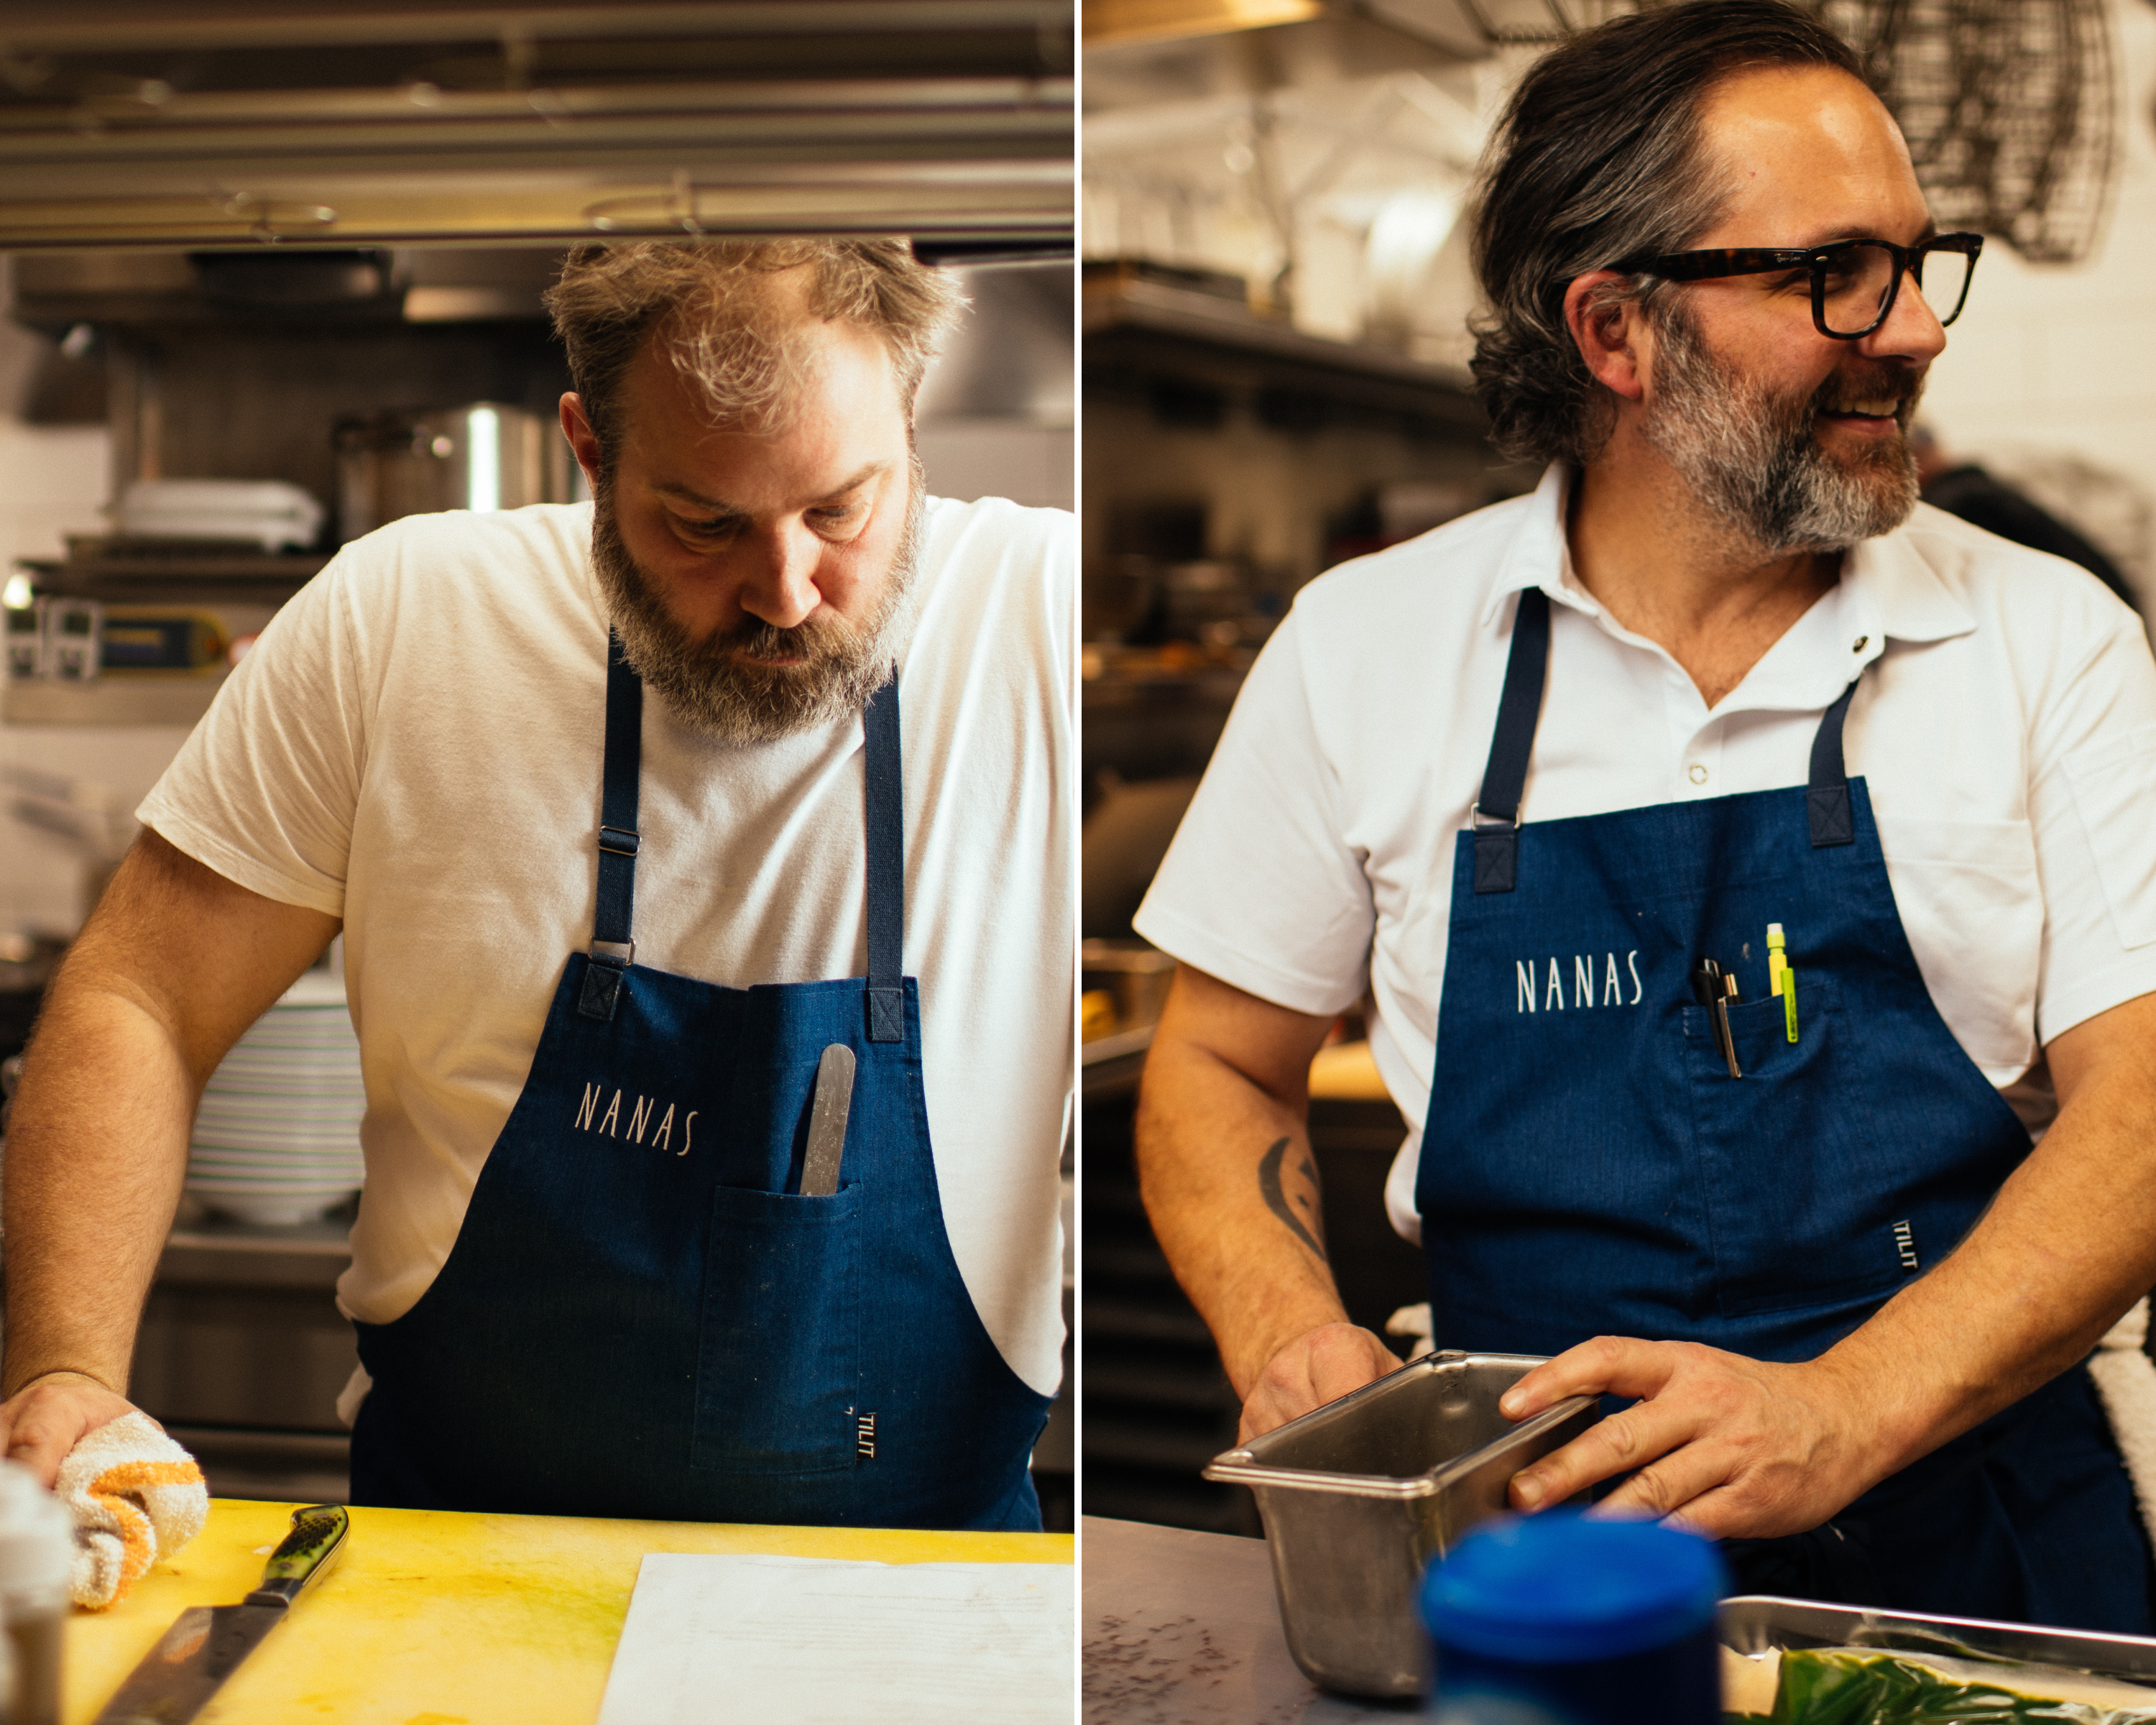 A collage of two men wearing aprons in a kitchen